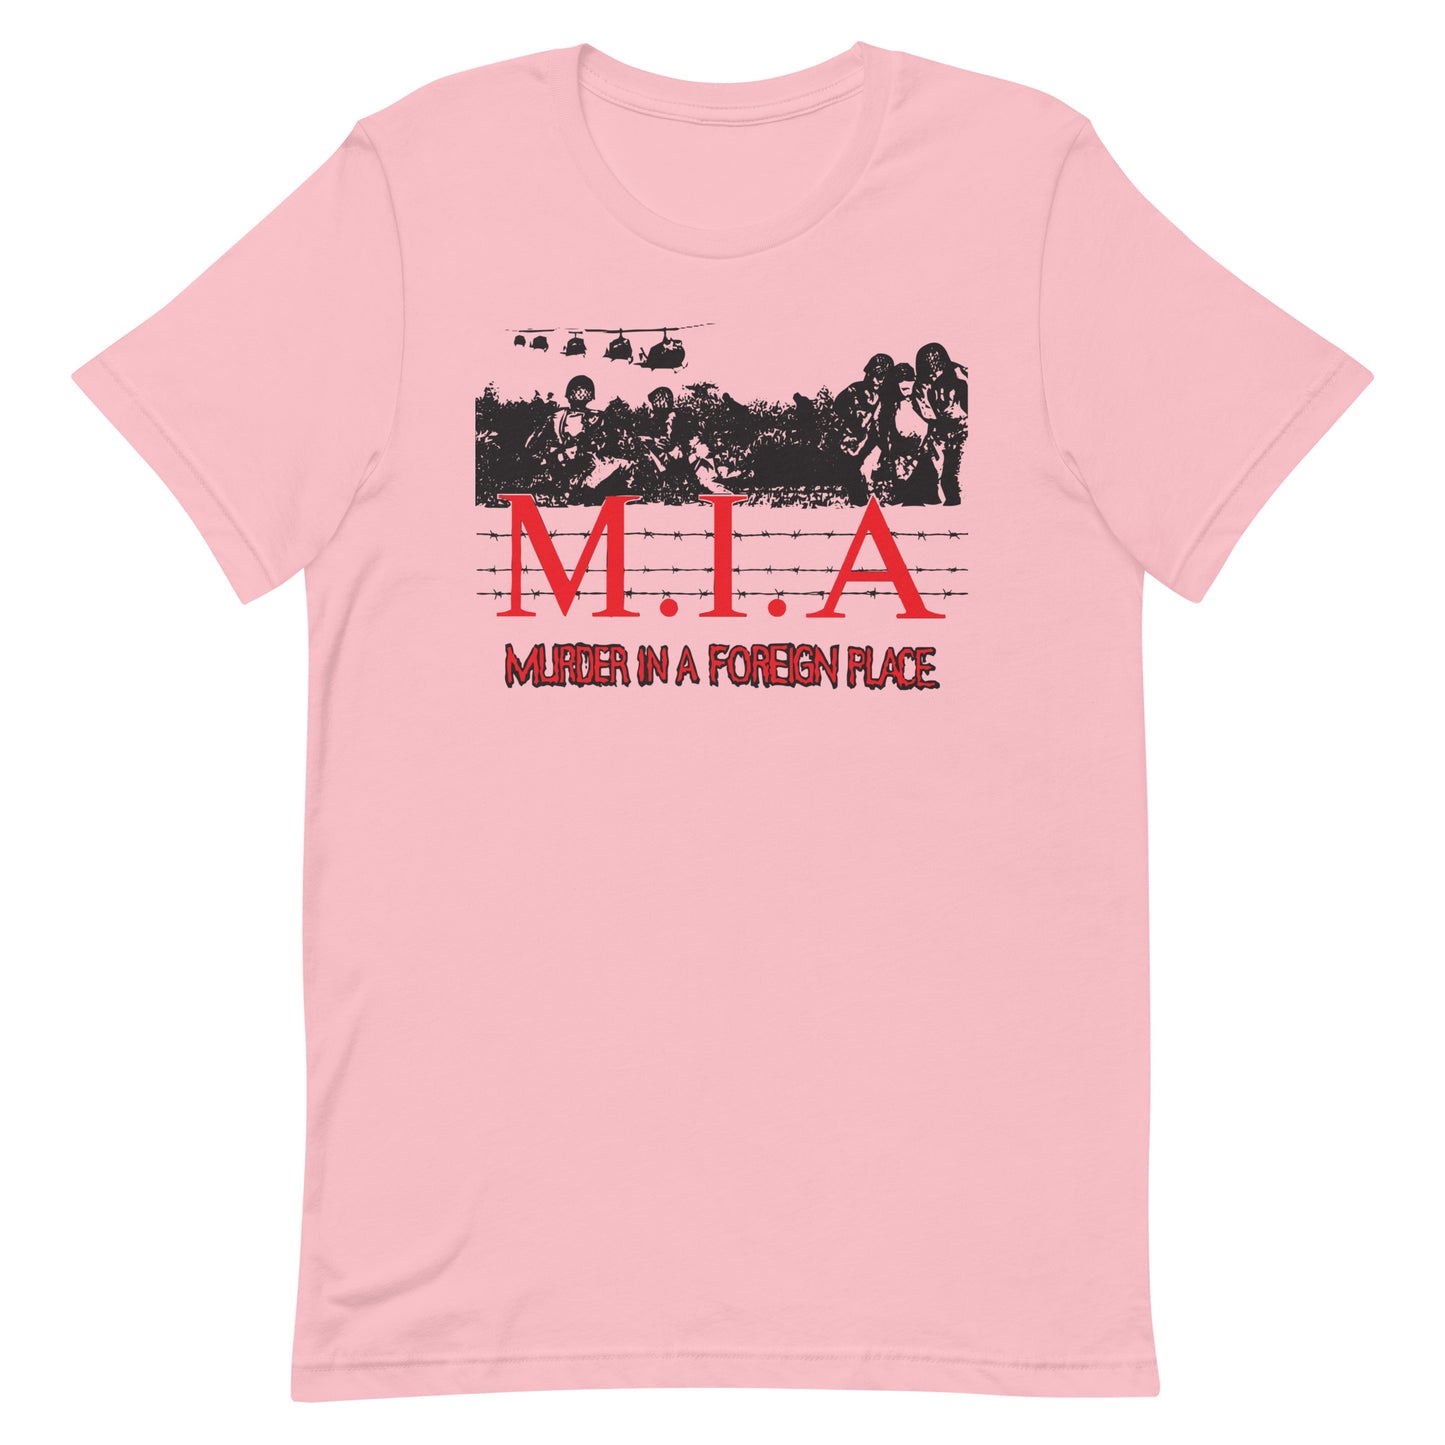 M.I.A. - Murder In A Foreign Place T-Shirt